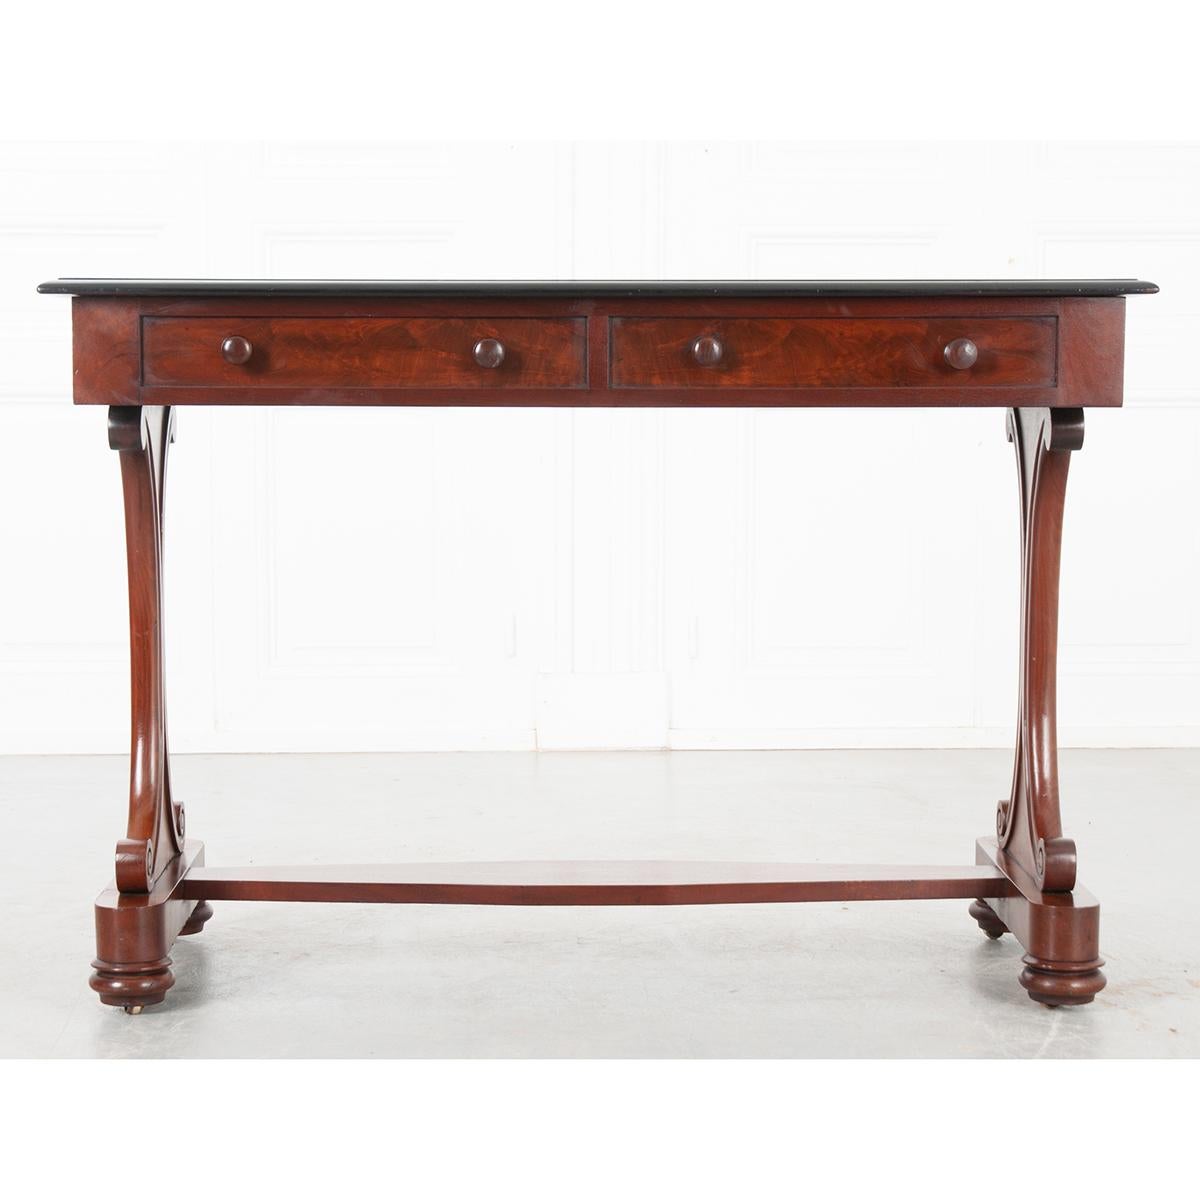 This is an English pedestal desk with two faux drawers just under the ebonized top. All sit on a curved pedestal atop a plinth base with bun feet on top of metal casters. The base is connected by a flat stretcher. A pretty little table! Circa